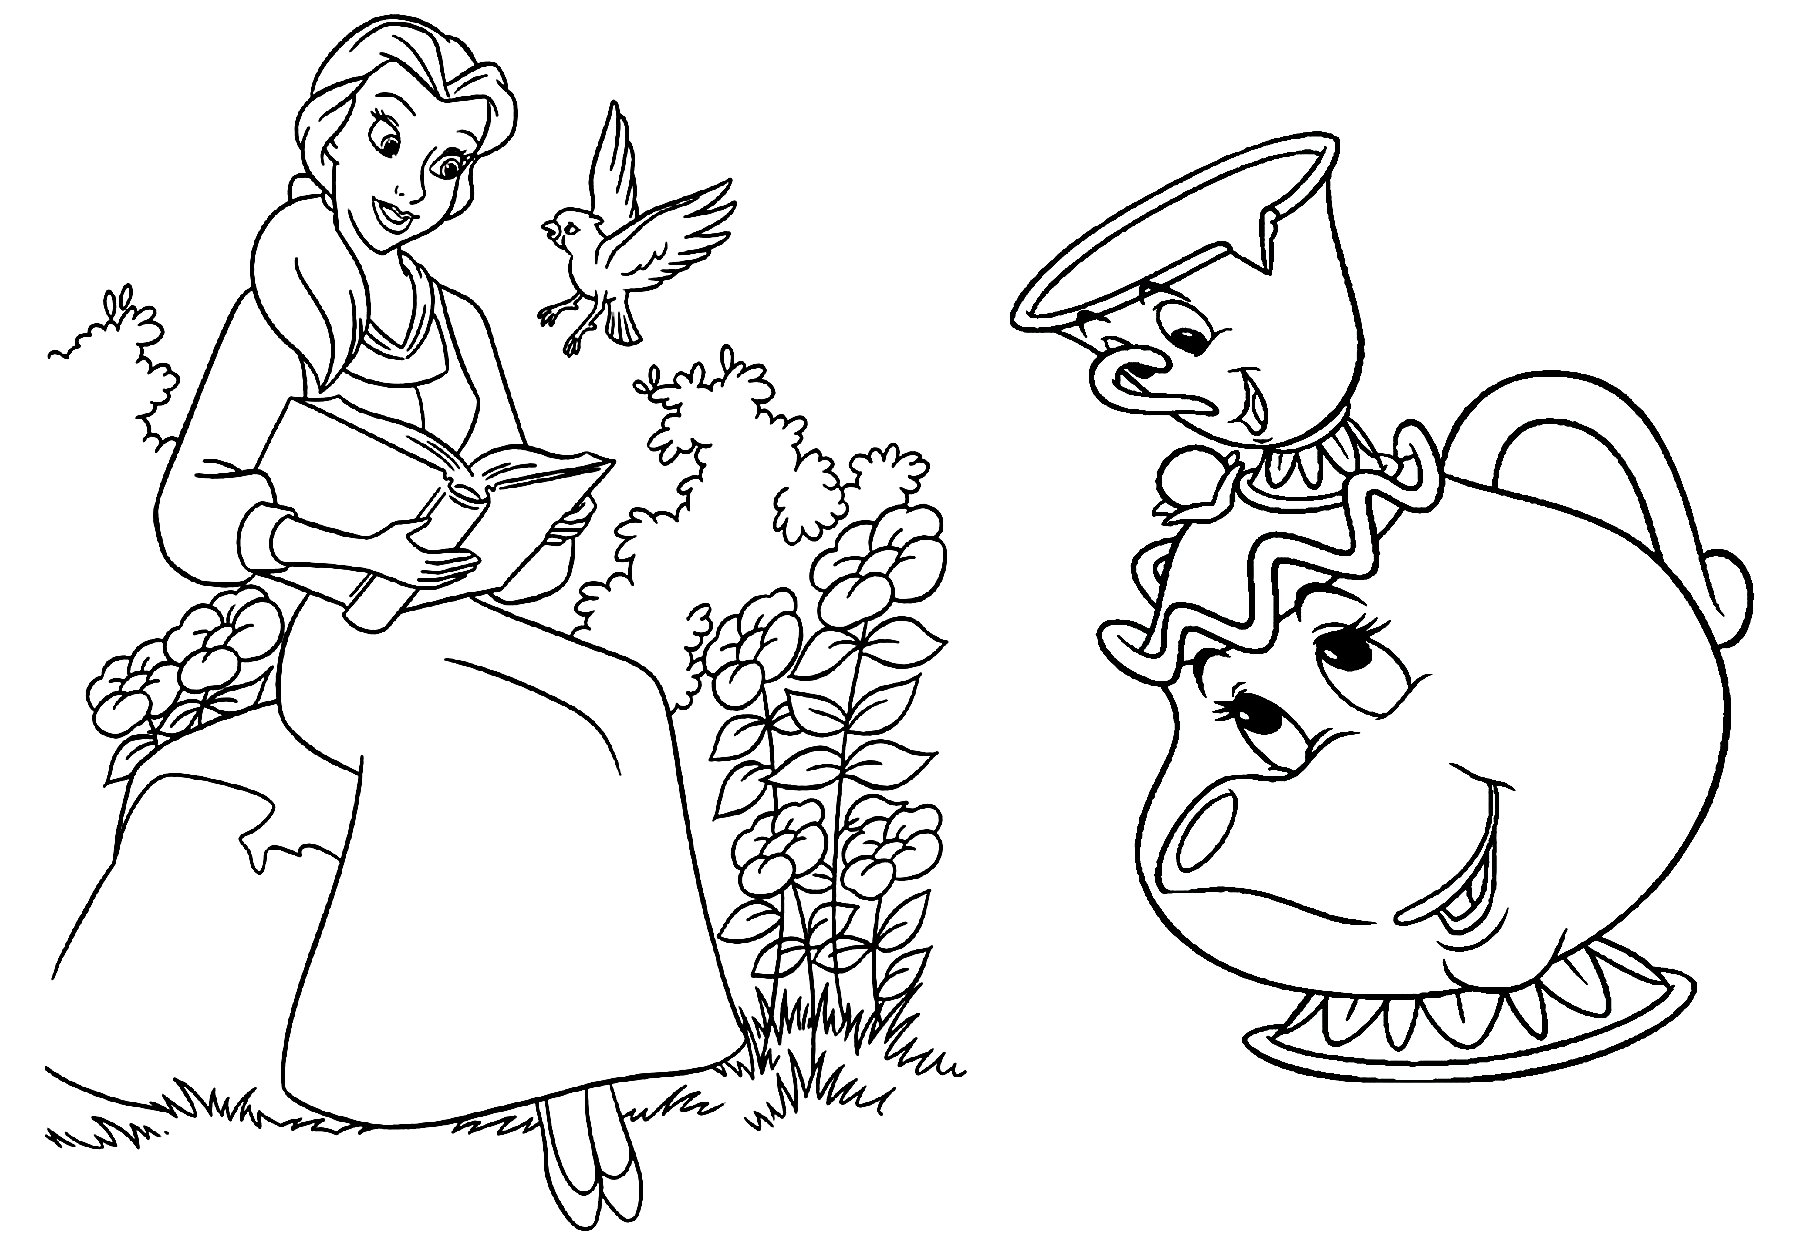 Beauty and the Beast Coloring Pages: Princess Belle